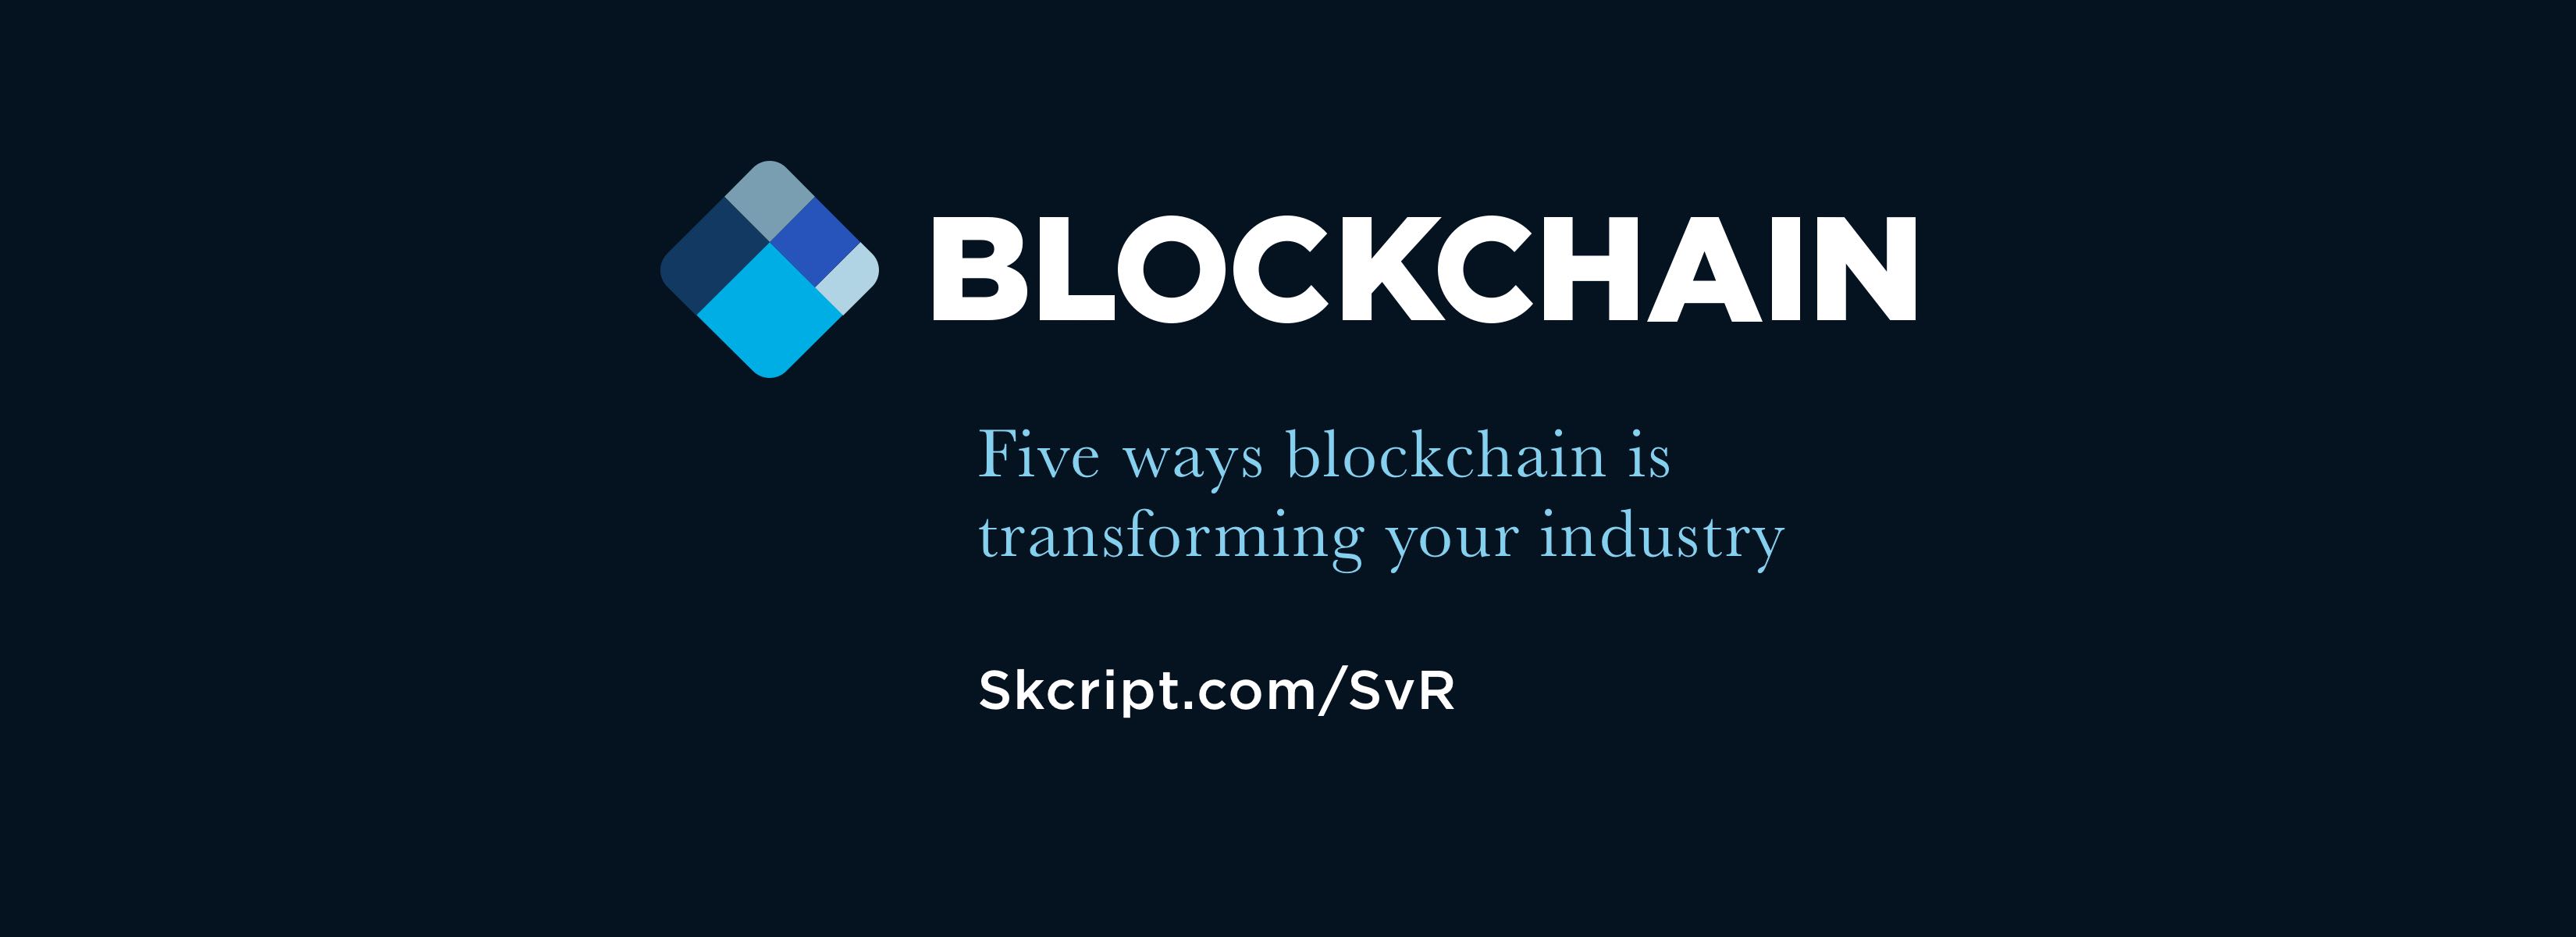 Five ways blockchain is transforming your industry